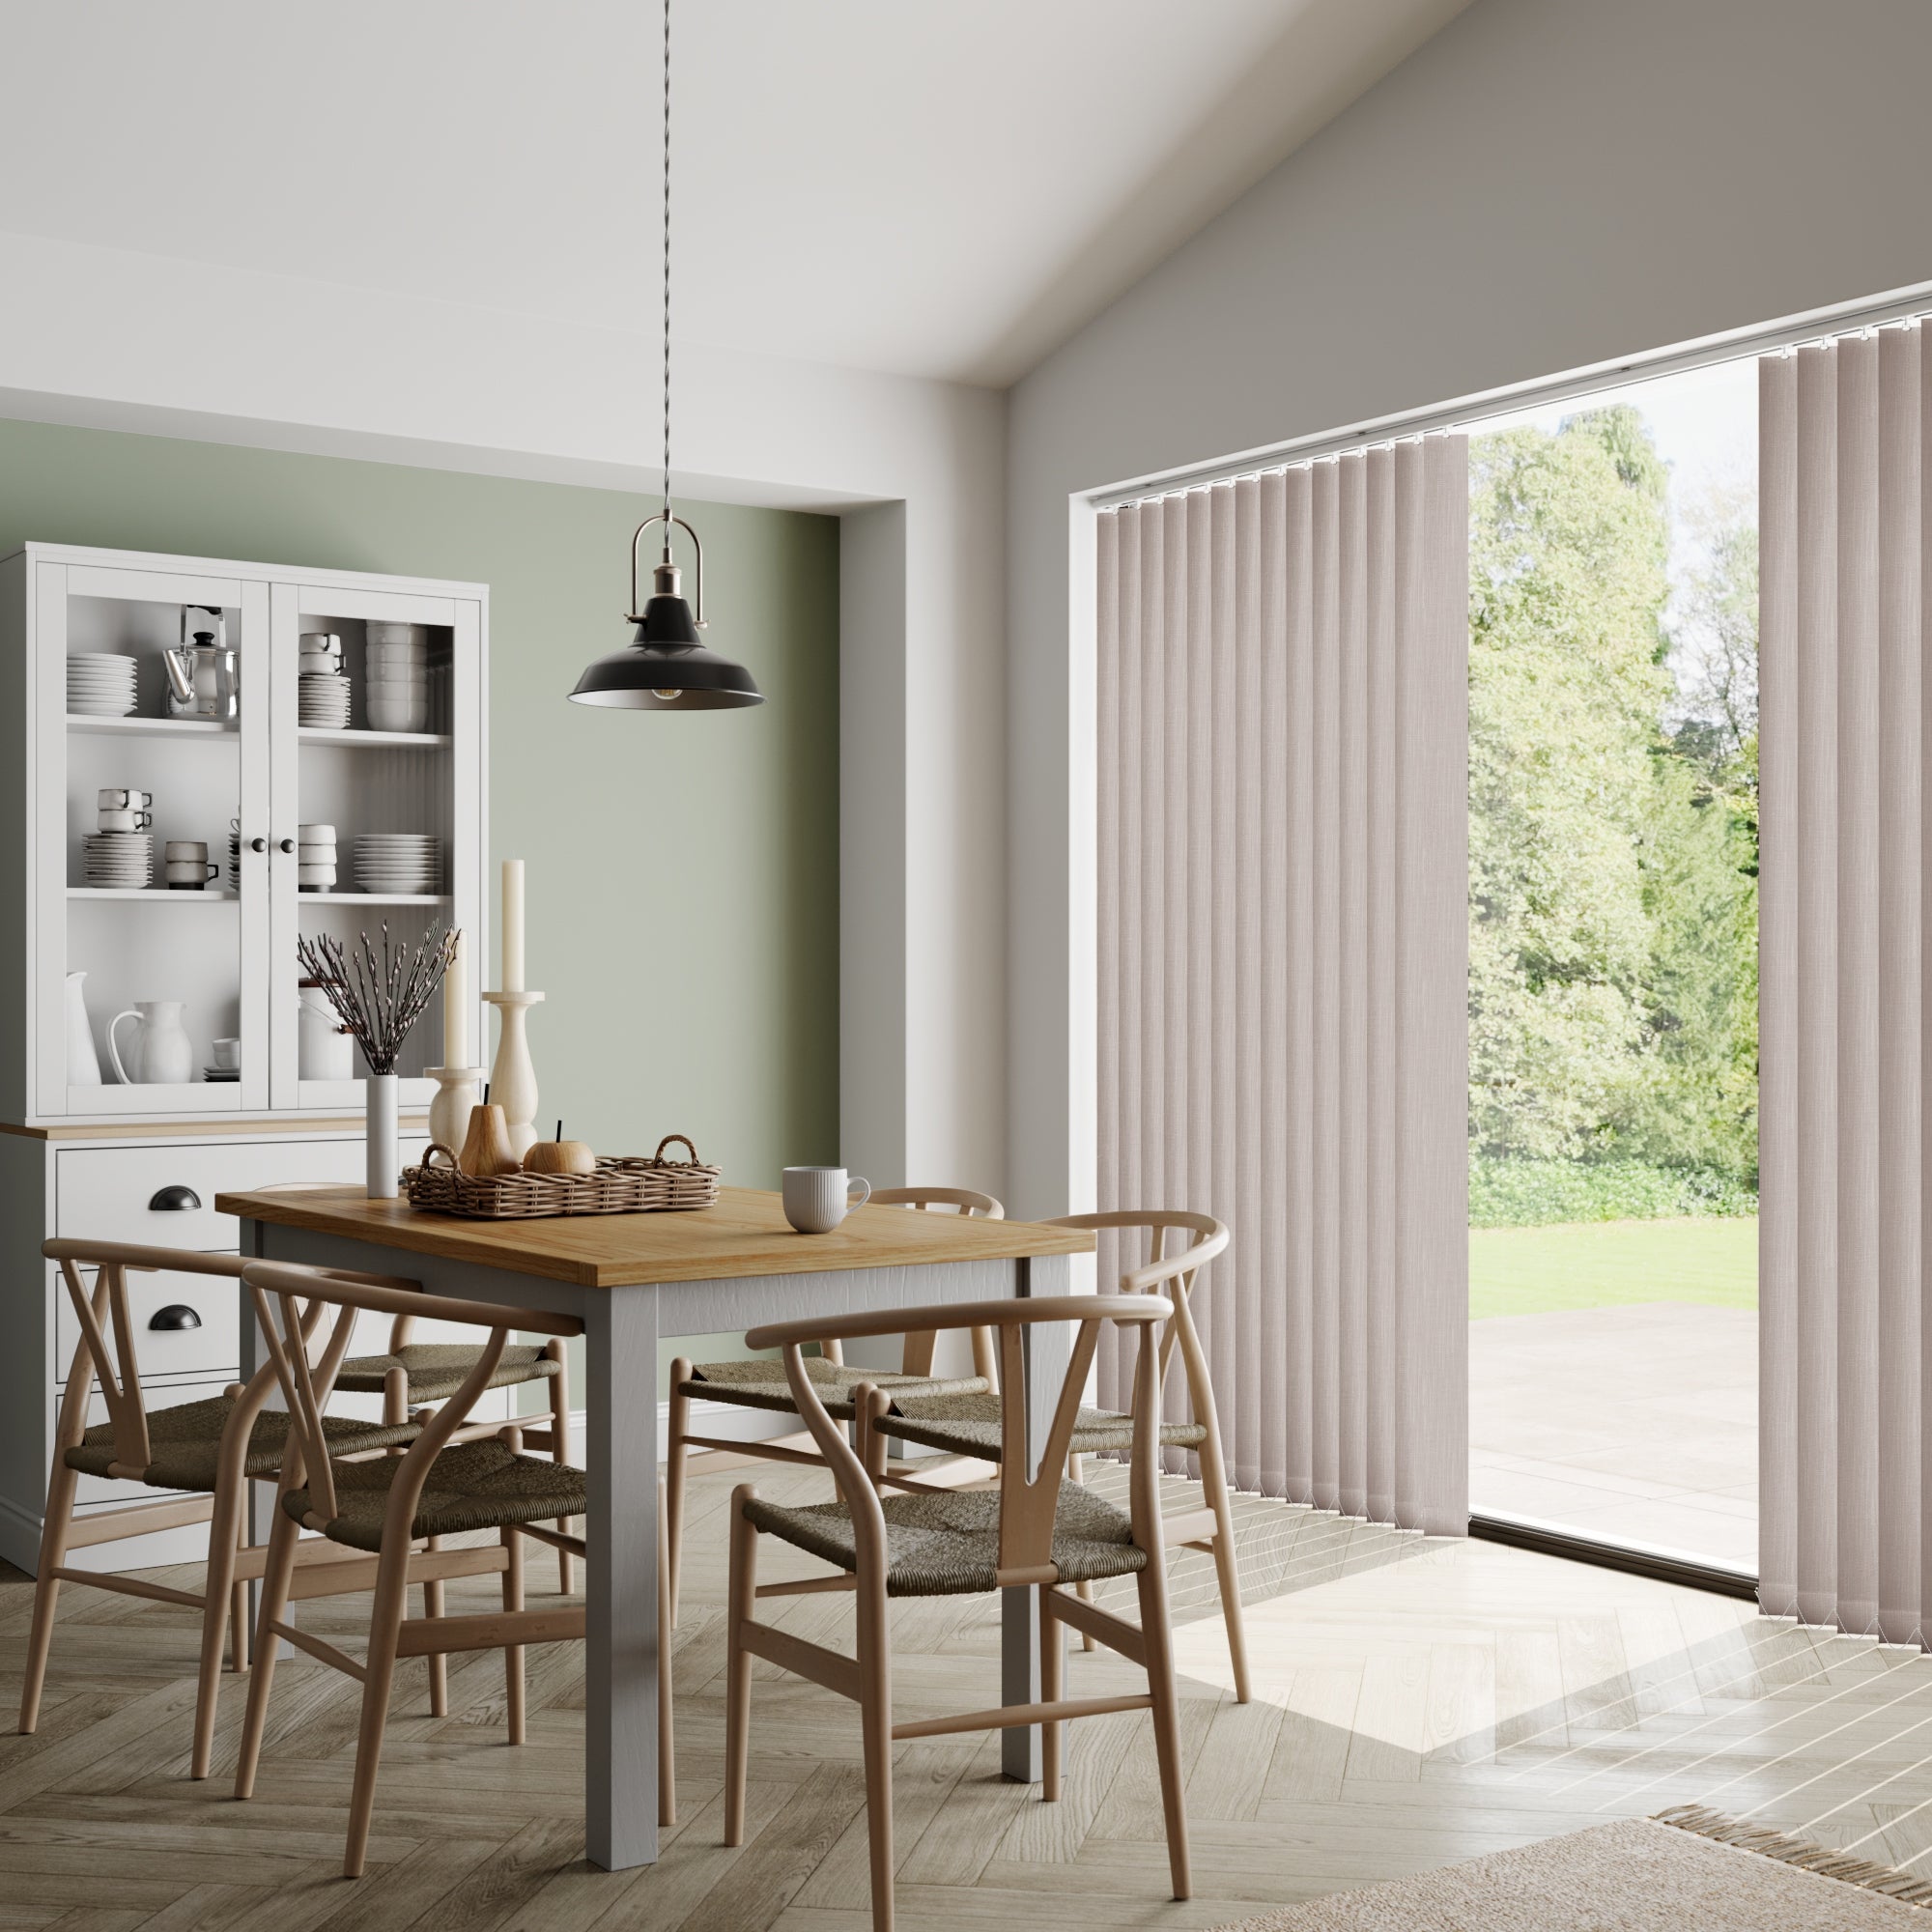 Bexley Made to Measure Vertical Blind Bexley Peony